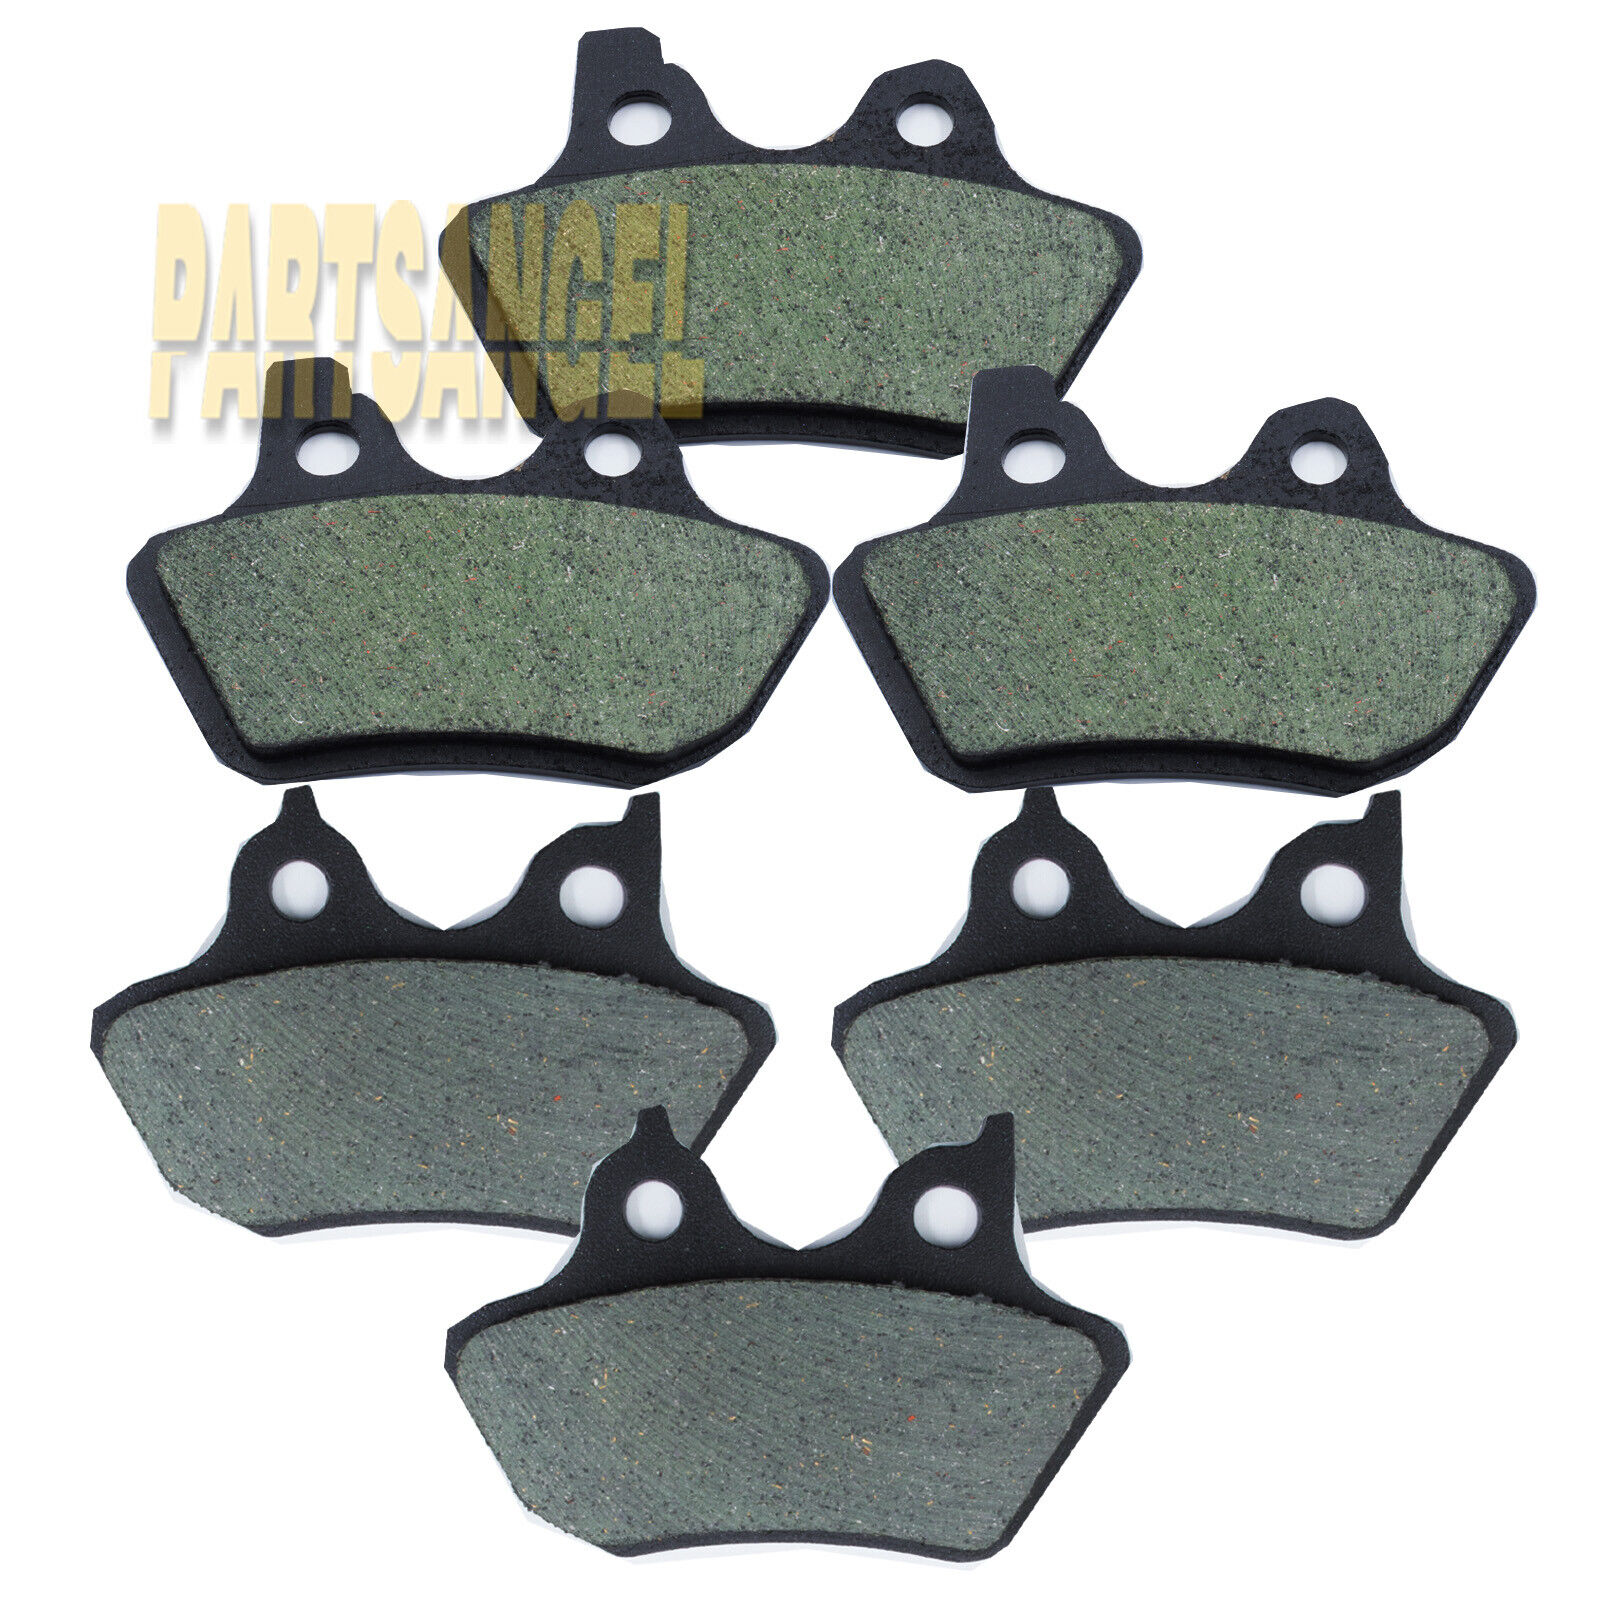 Front & Rear Brake Pads For 2000-2007 Harley FLHRCI Road King /Touring FLHT